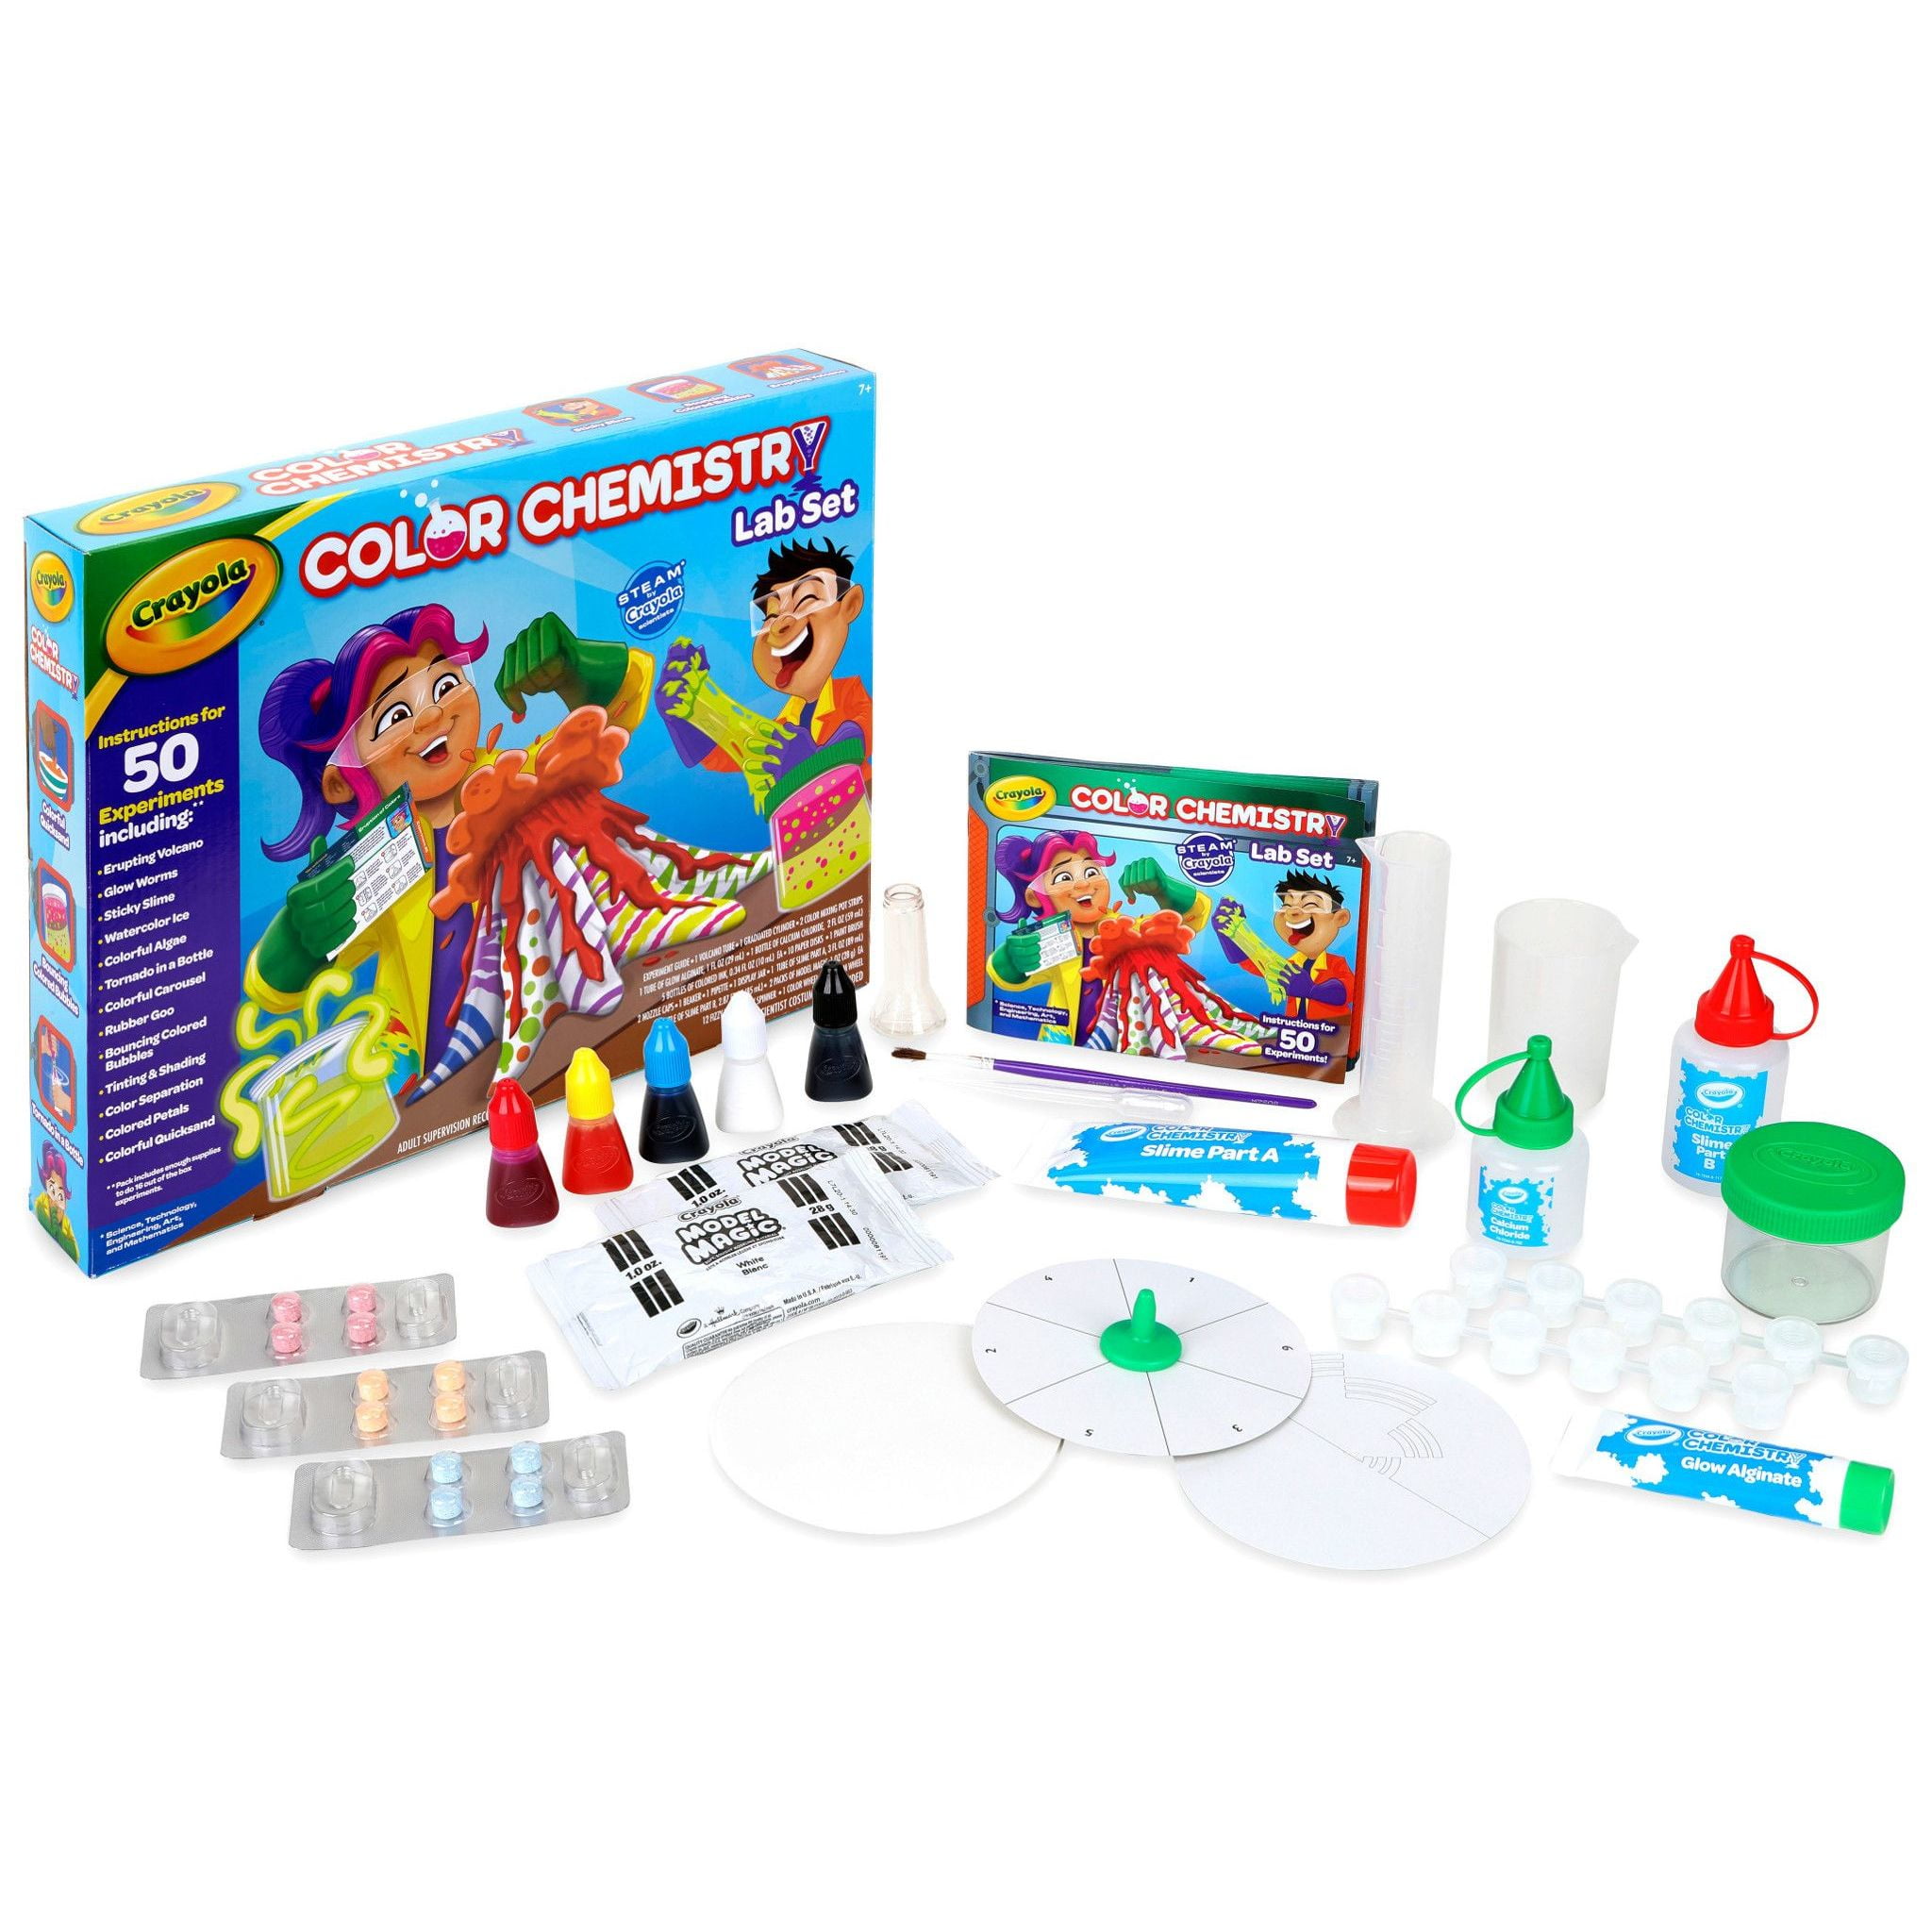 Details about   Science Kits For Kids Scientist Lab Experiment Chemistry Kit Toys For Kids Over 